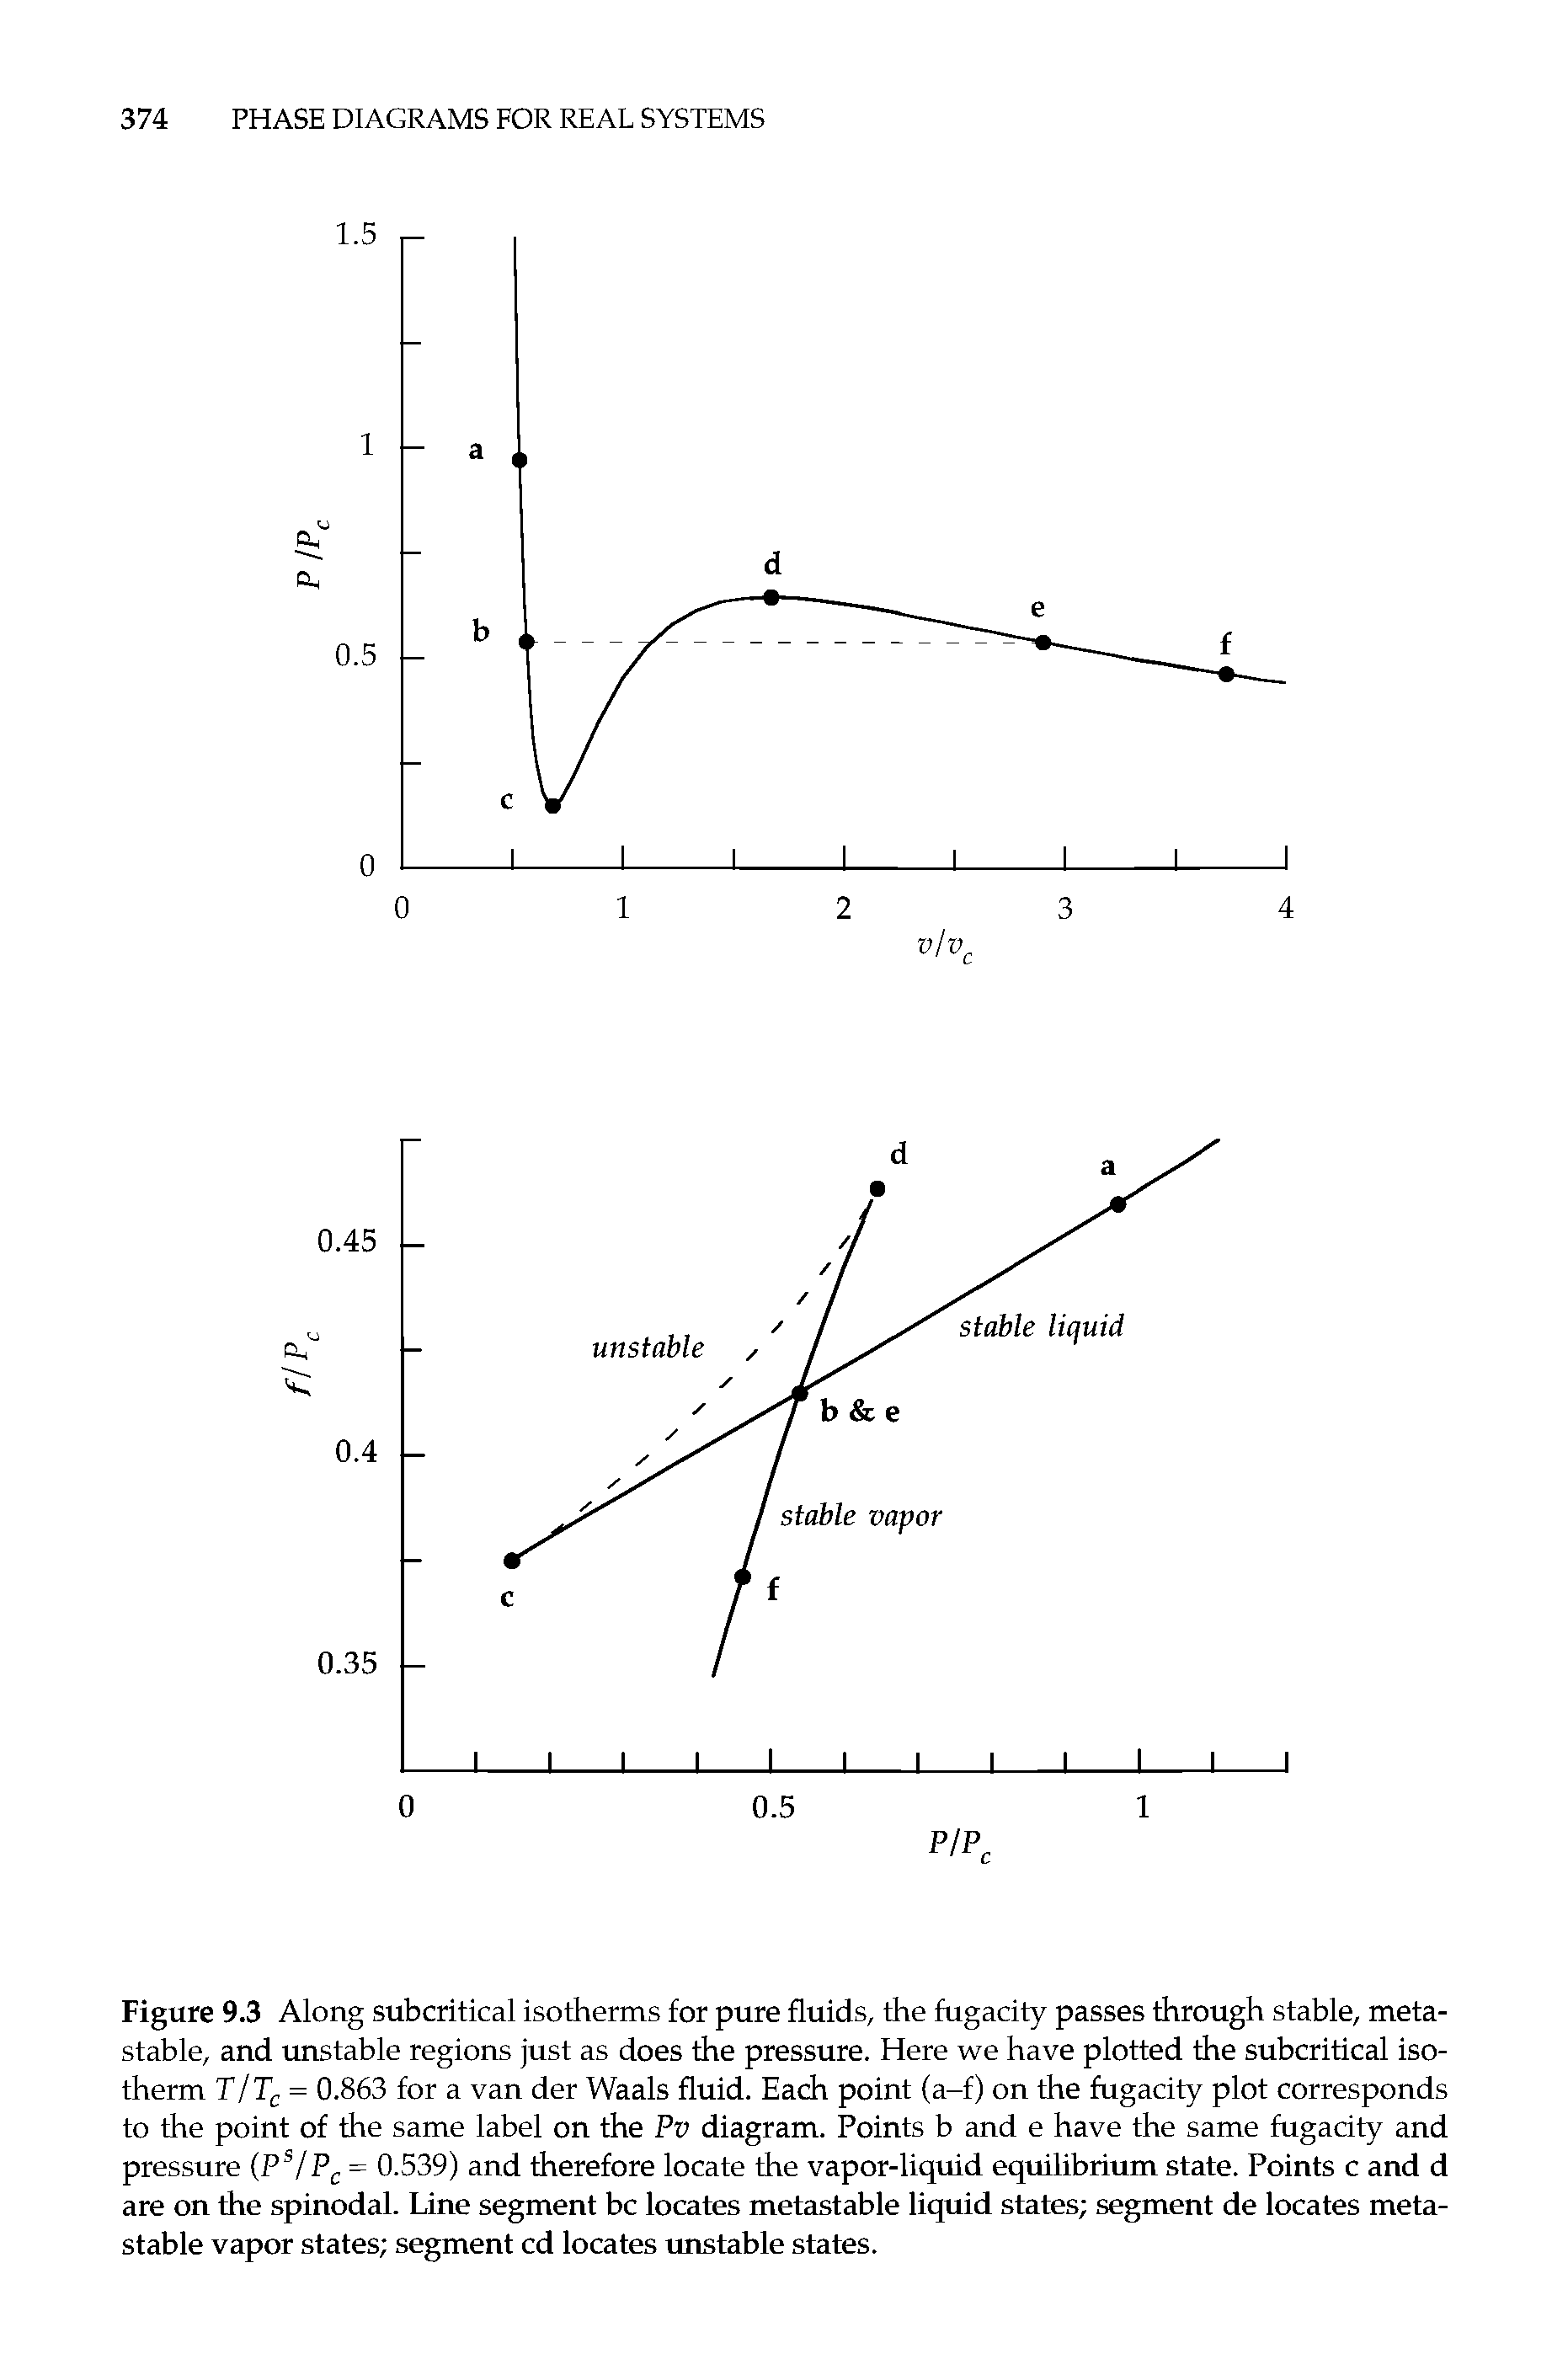 Figure 9.3 Along subcritical isotherms for pure fluids, the fugacity passes through stable, metastable, and unstable regions just as does the pressure. Here we have plotted the subcritical isotherm TlT = 0.863 for a van der Waals fluid. Each point (a-f) on the fugacity plot corresponds to the point of the same label on the Pv diagram. Points b and e have the same fugacity and pressure (P /= 0.539) and therefore locate the vapor-liquid equUibrium state. Points c and d are on the spinodal. Line segment be locates metastable liquid states segment de locates metastable vapor states segment cd locates unstable states.